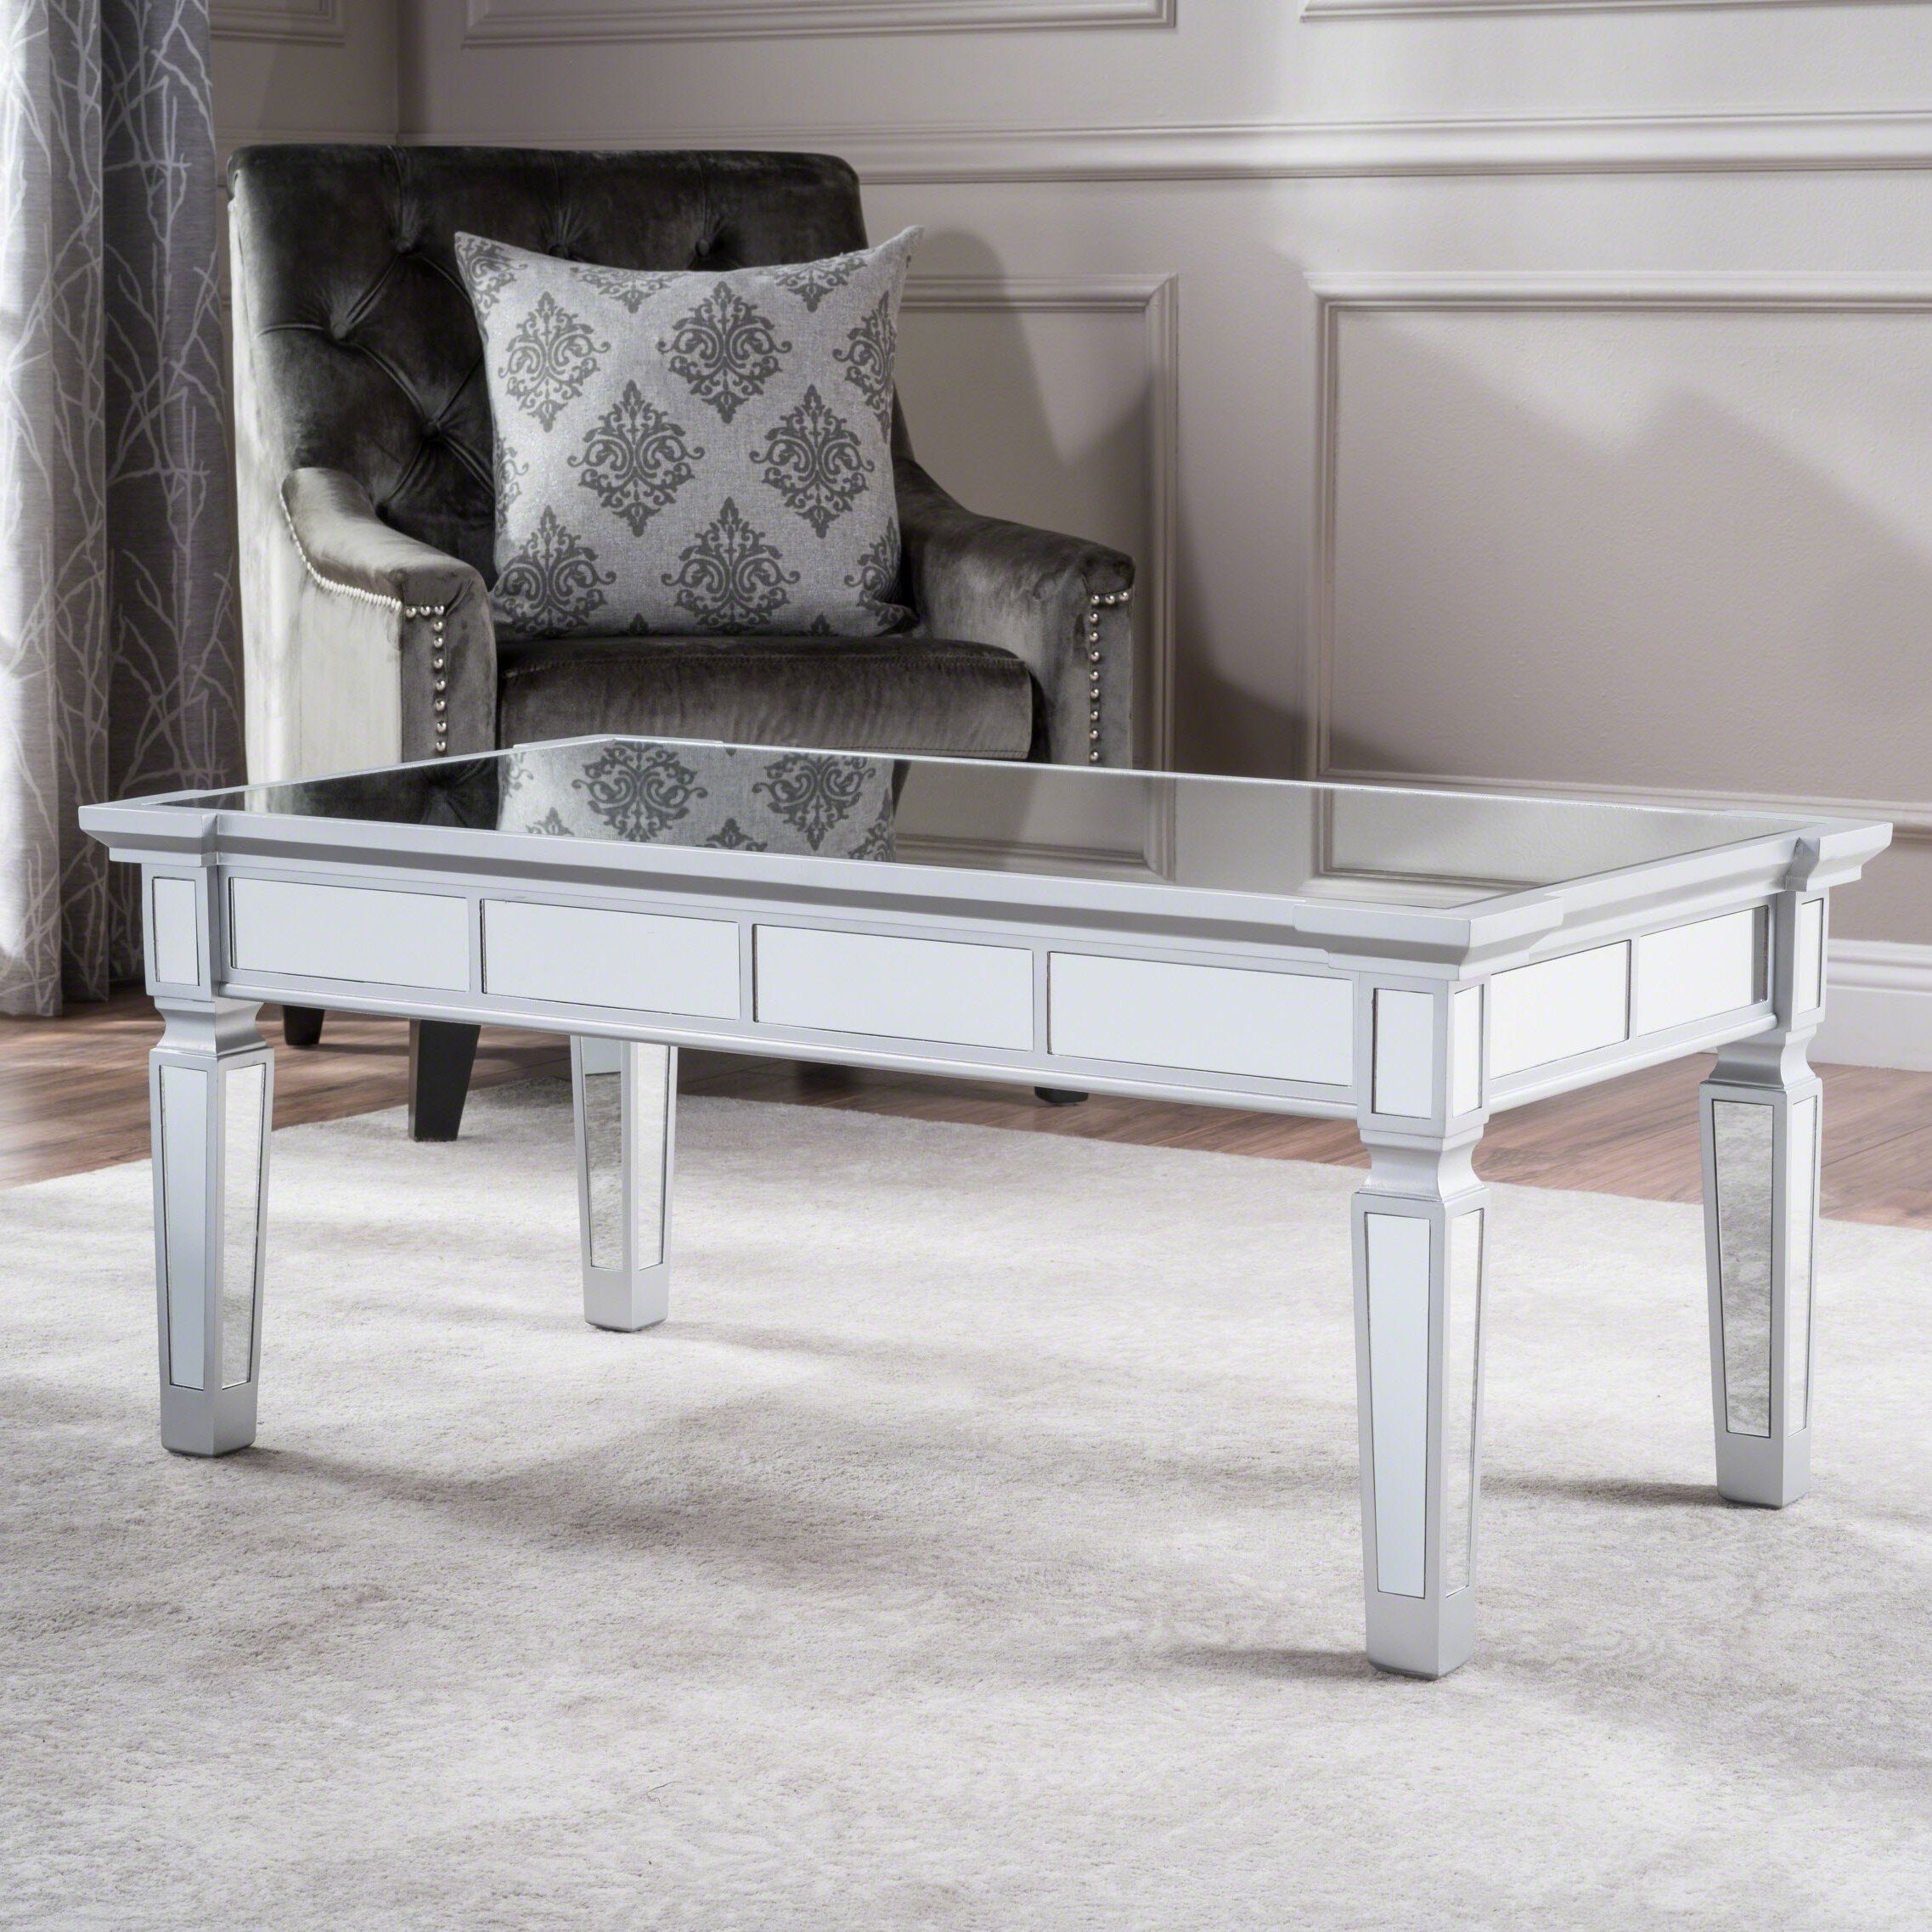 House Of Hampton® Walsall 4 Legs Coffee Table & Reviews | Wayfair With Mirrored Coffee Tables (View 19 of 20)